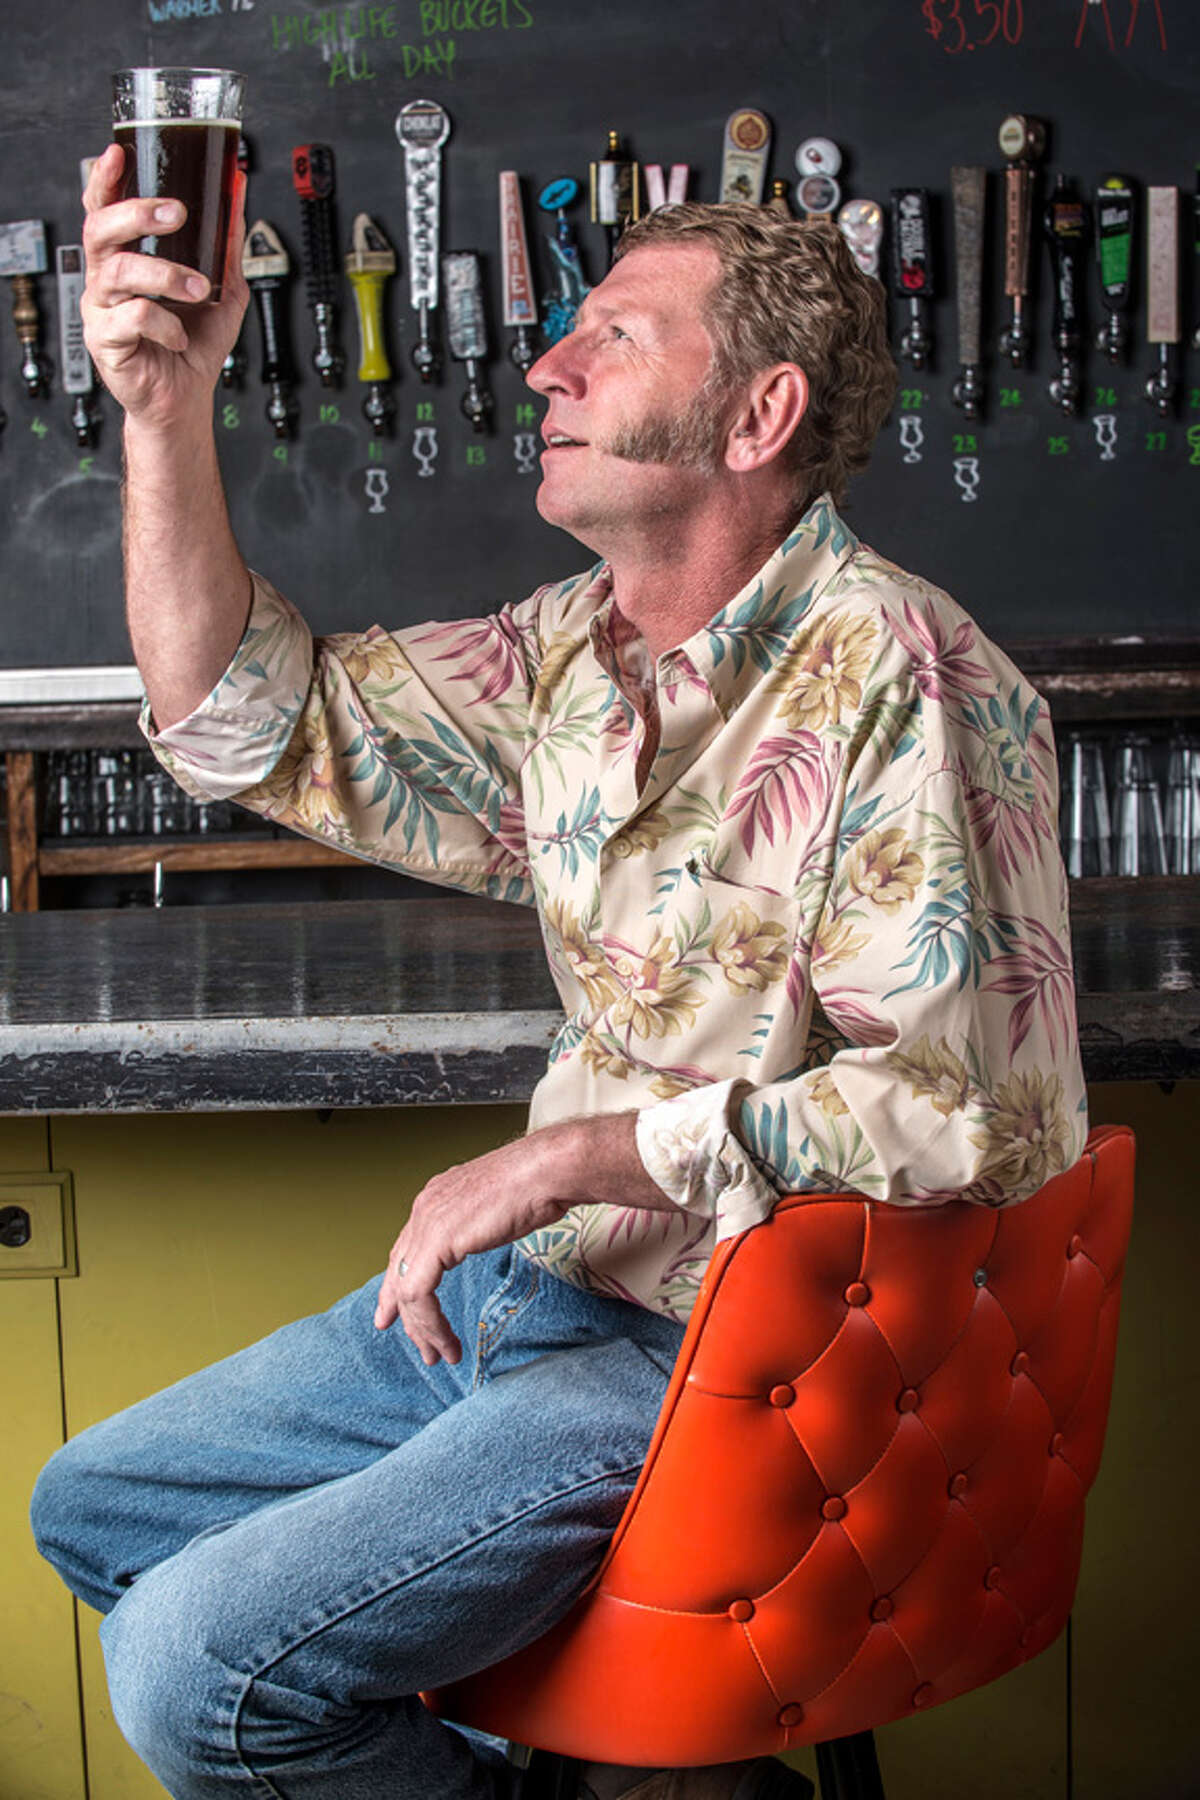 "Rob, along with his wife Sara, are the brains behind Cottonwood pub and LaGrange restaurant. He's had his signature sideburns since high school. Now that's commitment." -- Ray Redding  Rob Cromie shot by Ray Redding for his exhibit, "Houston Hair-raisers."